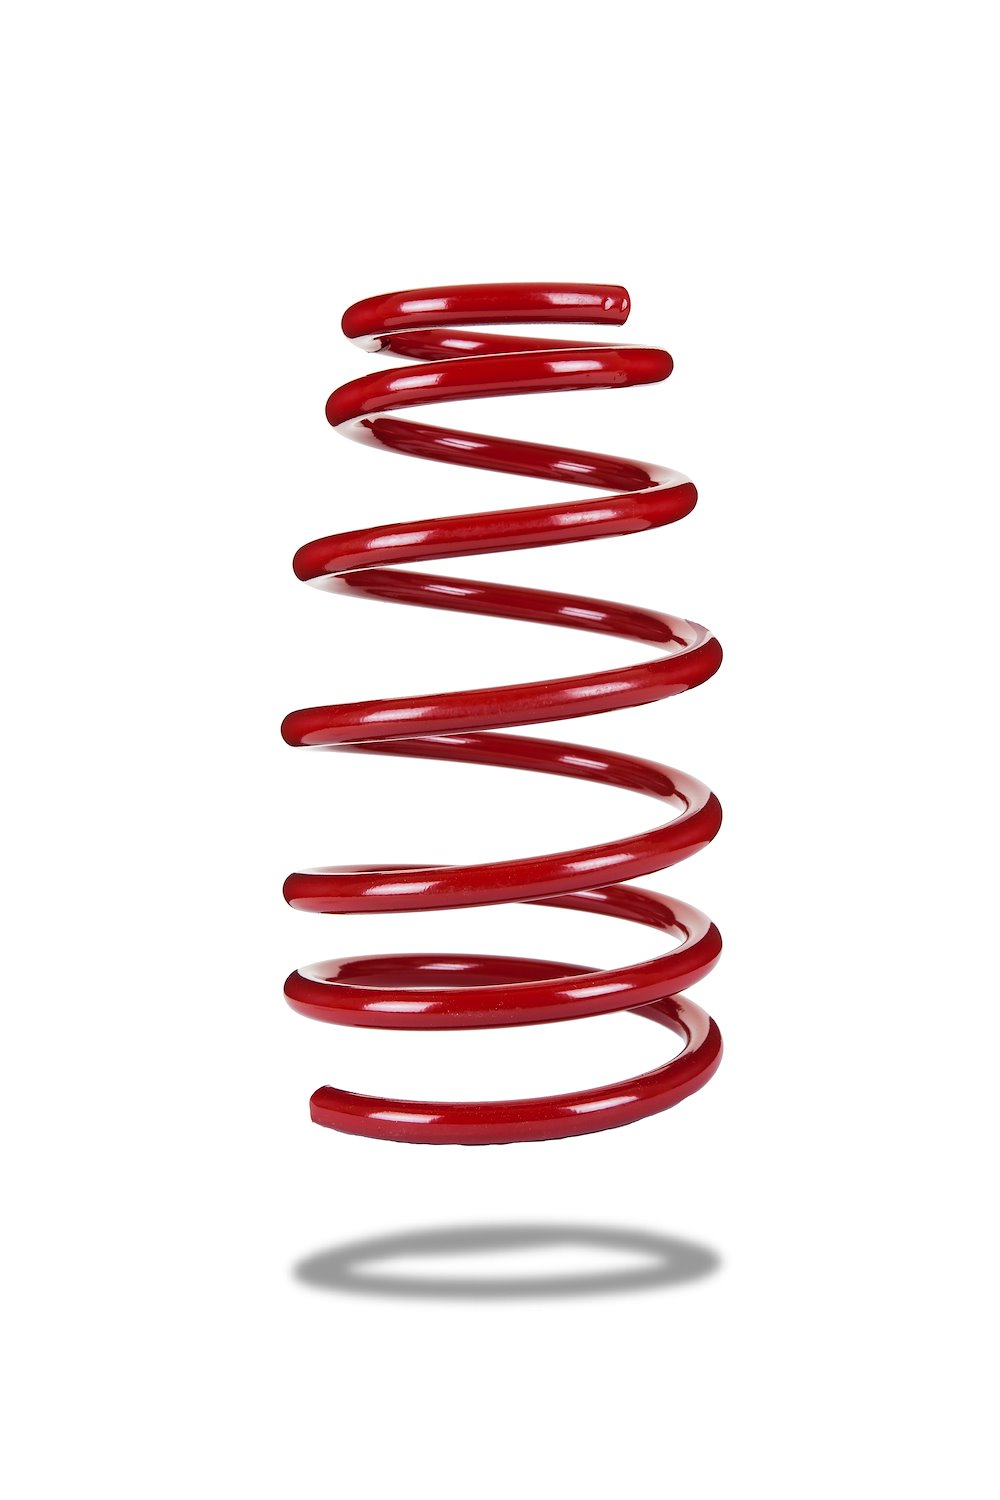 PED-220008 Coil Spring, Front, Ford Mustang S197, Low